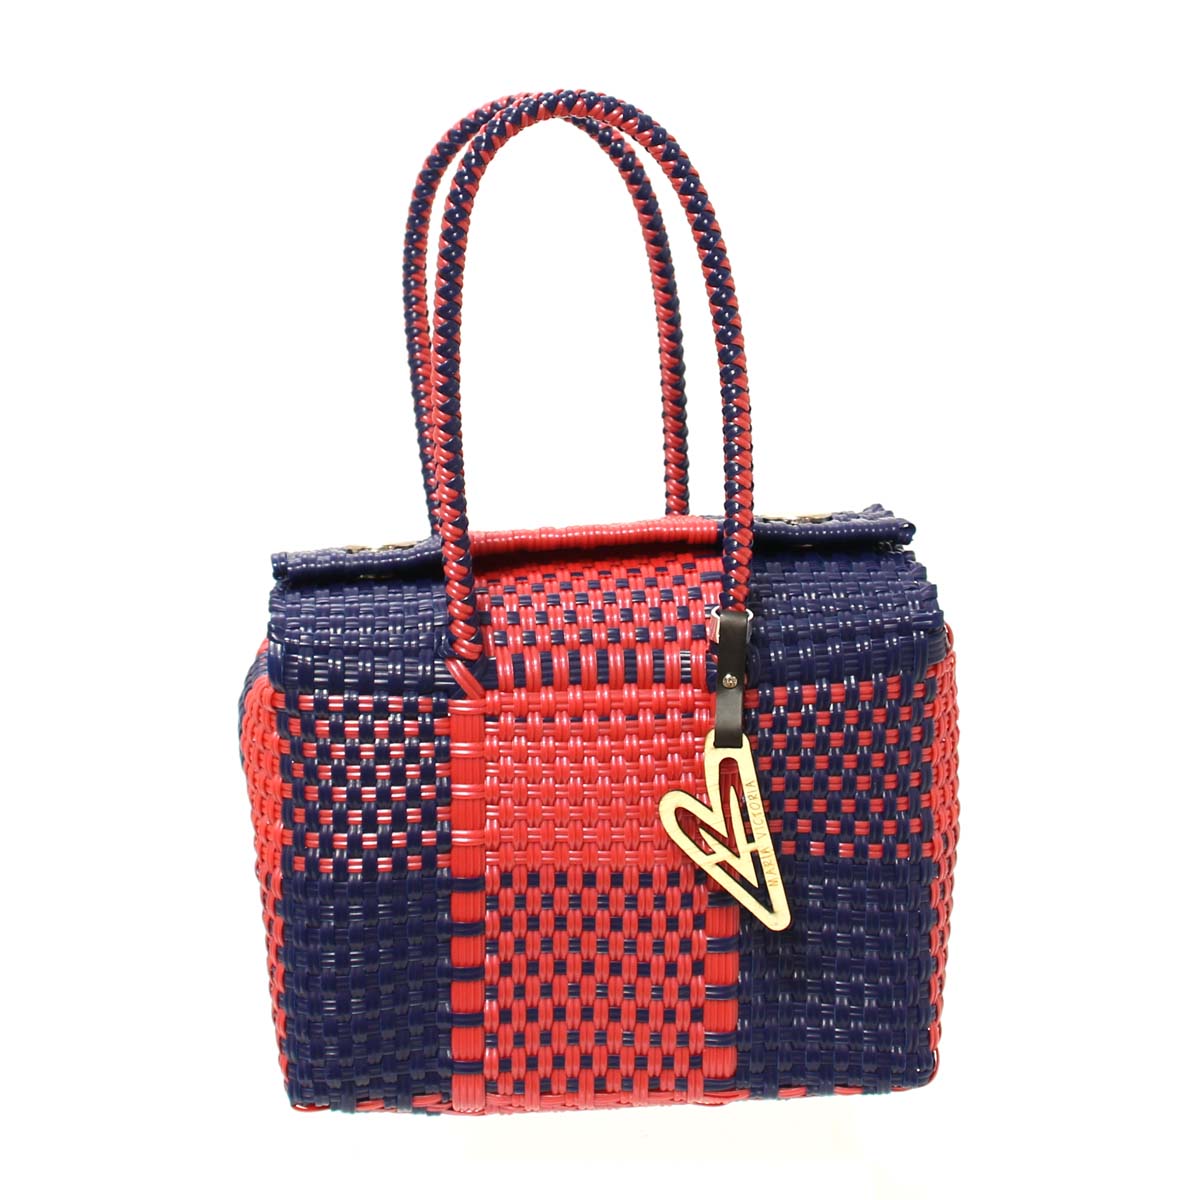 Maria Victoria Basket Tote-Red/NavyBlue, Upcycled, Handwoven